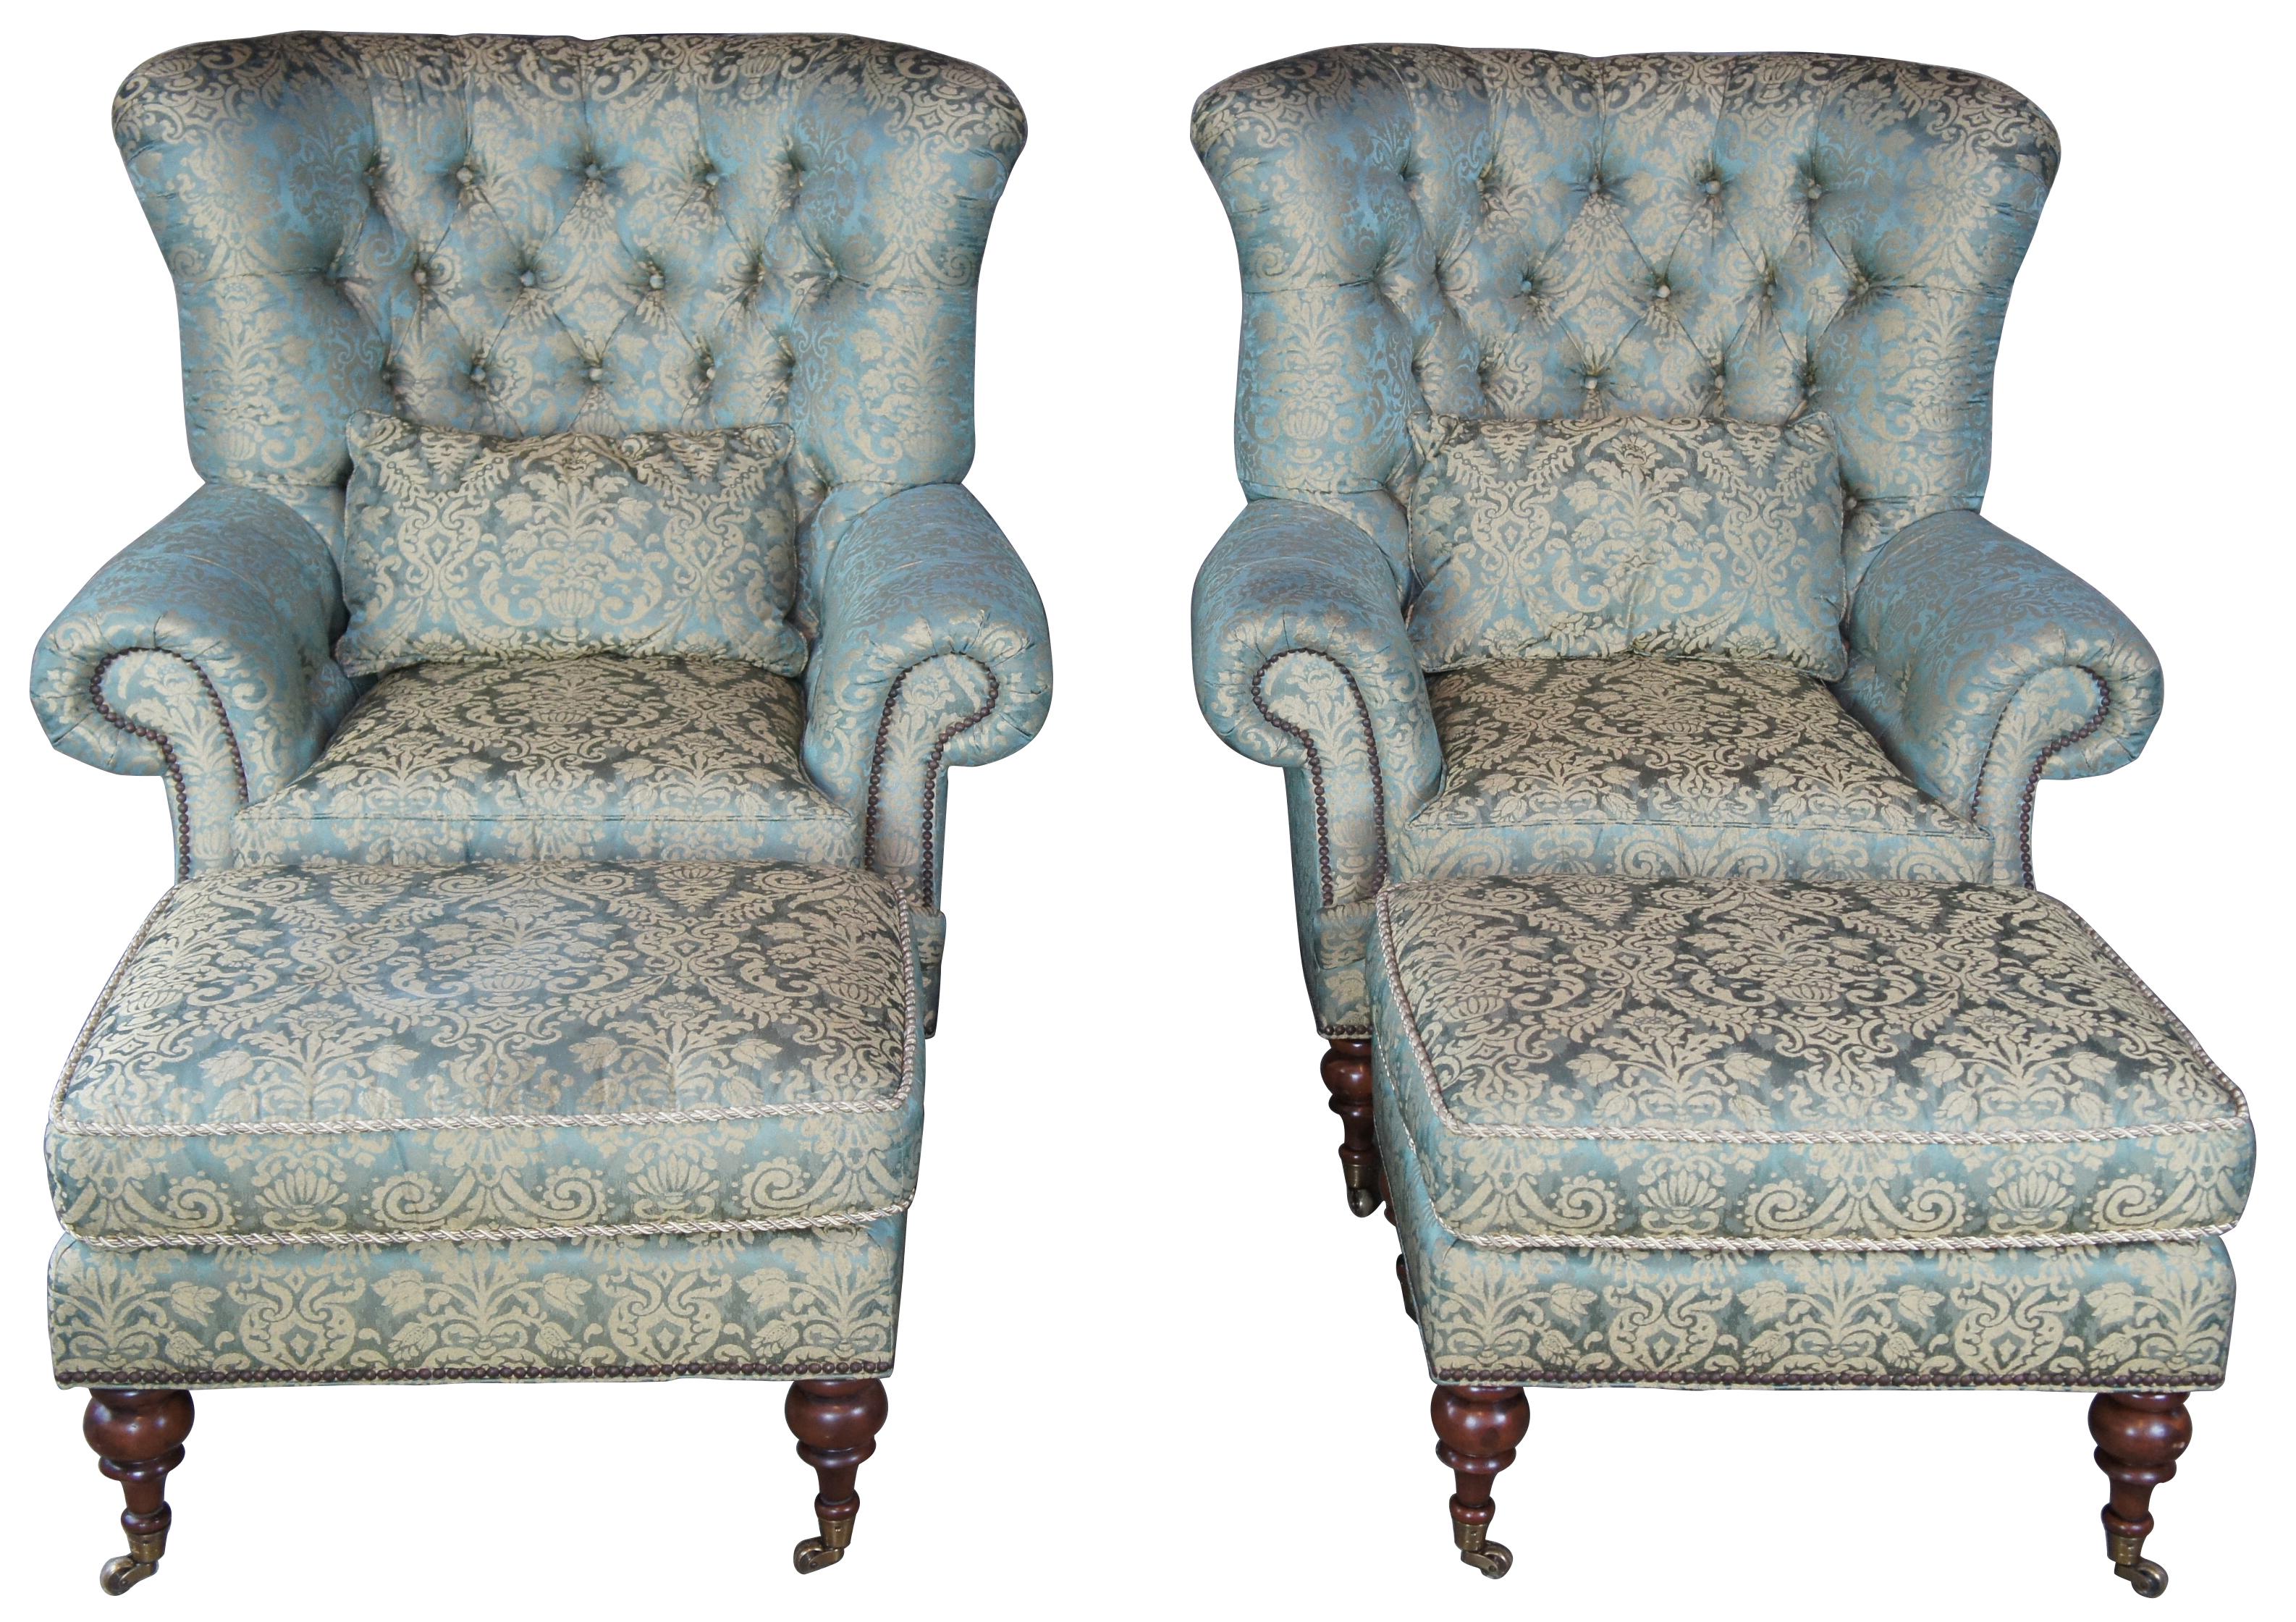 2 EJ Victor Beacon Hill wingback Kensington tufted arm wing chairs and ottomans

The Kensington wingchair by EJ Victor features a pronounced wing-back with tufted cushion, antiqued nailhead trim and turned front legs over brass castors.